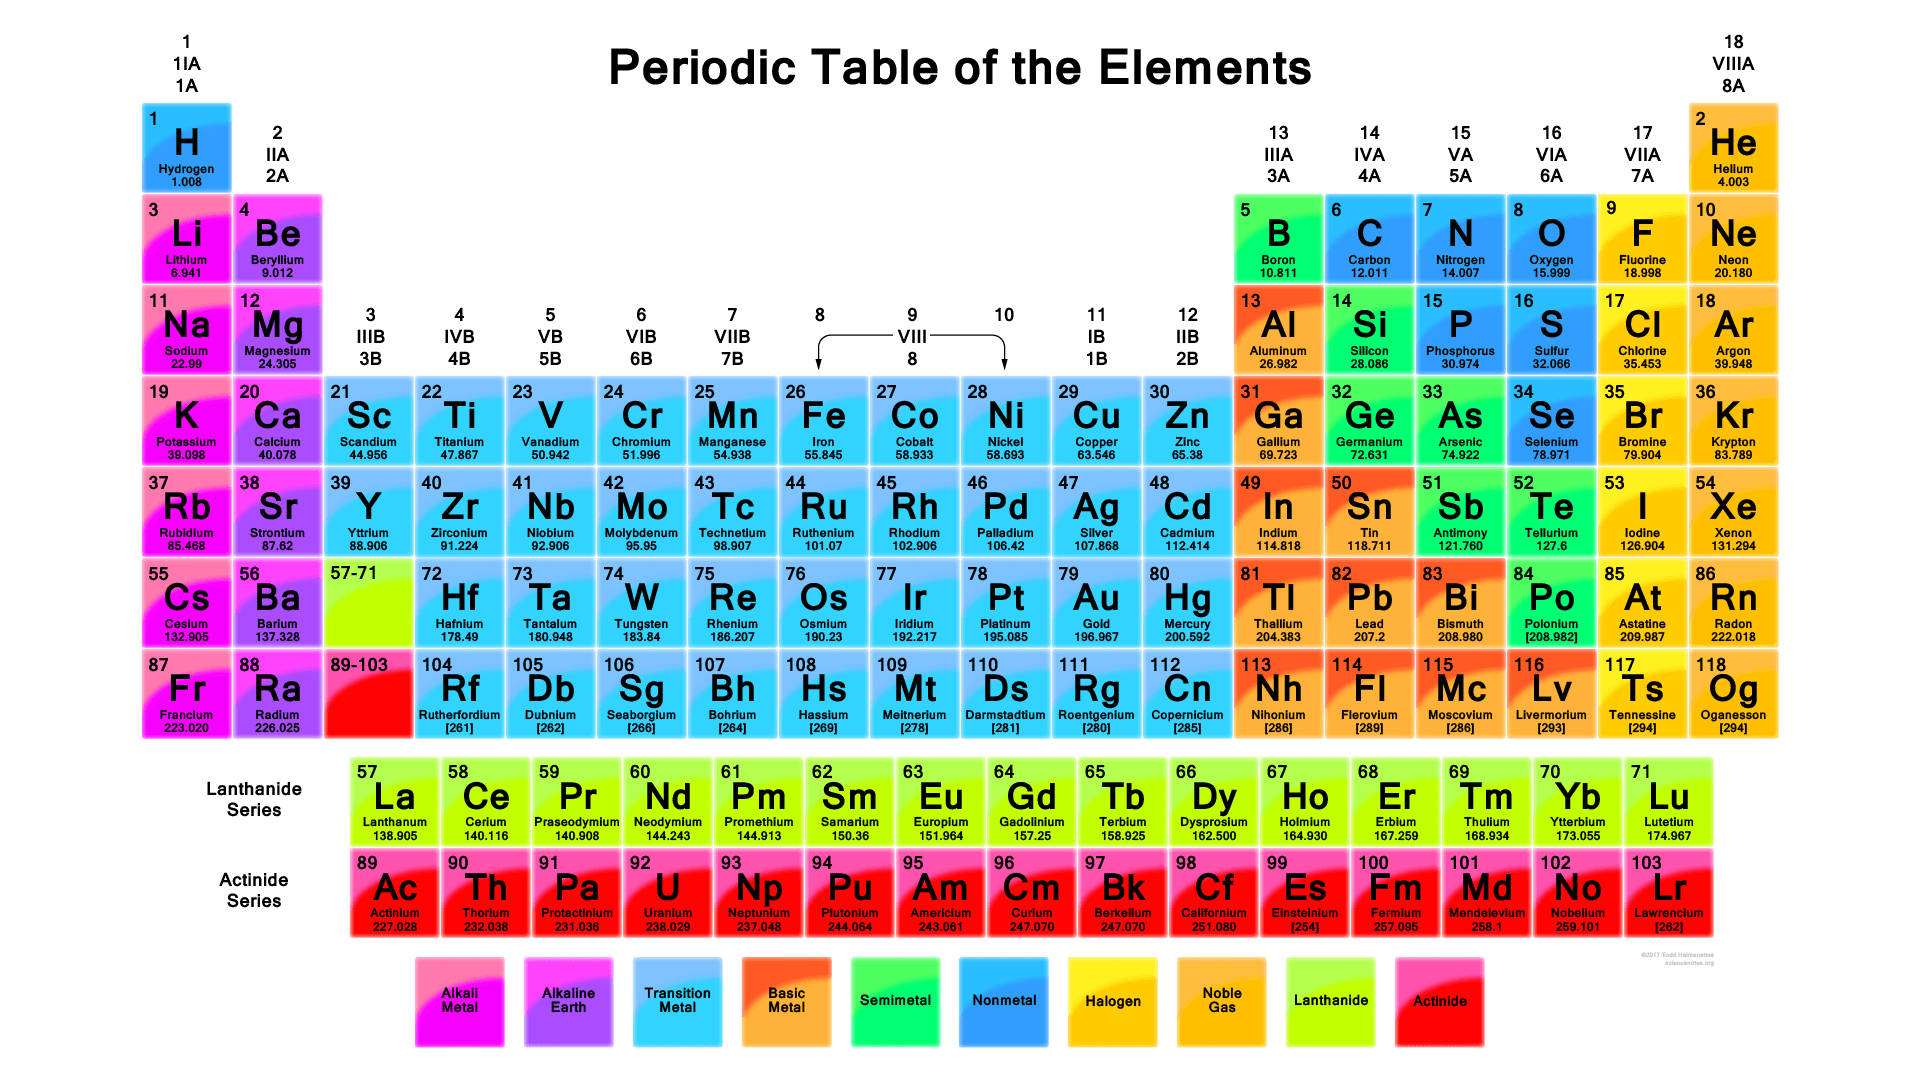 About Chemistry - New Colorful Periodic Table Wallpaper - Free Download  http://buff.ly/1uZPQla | Facebook